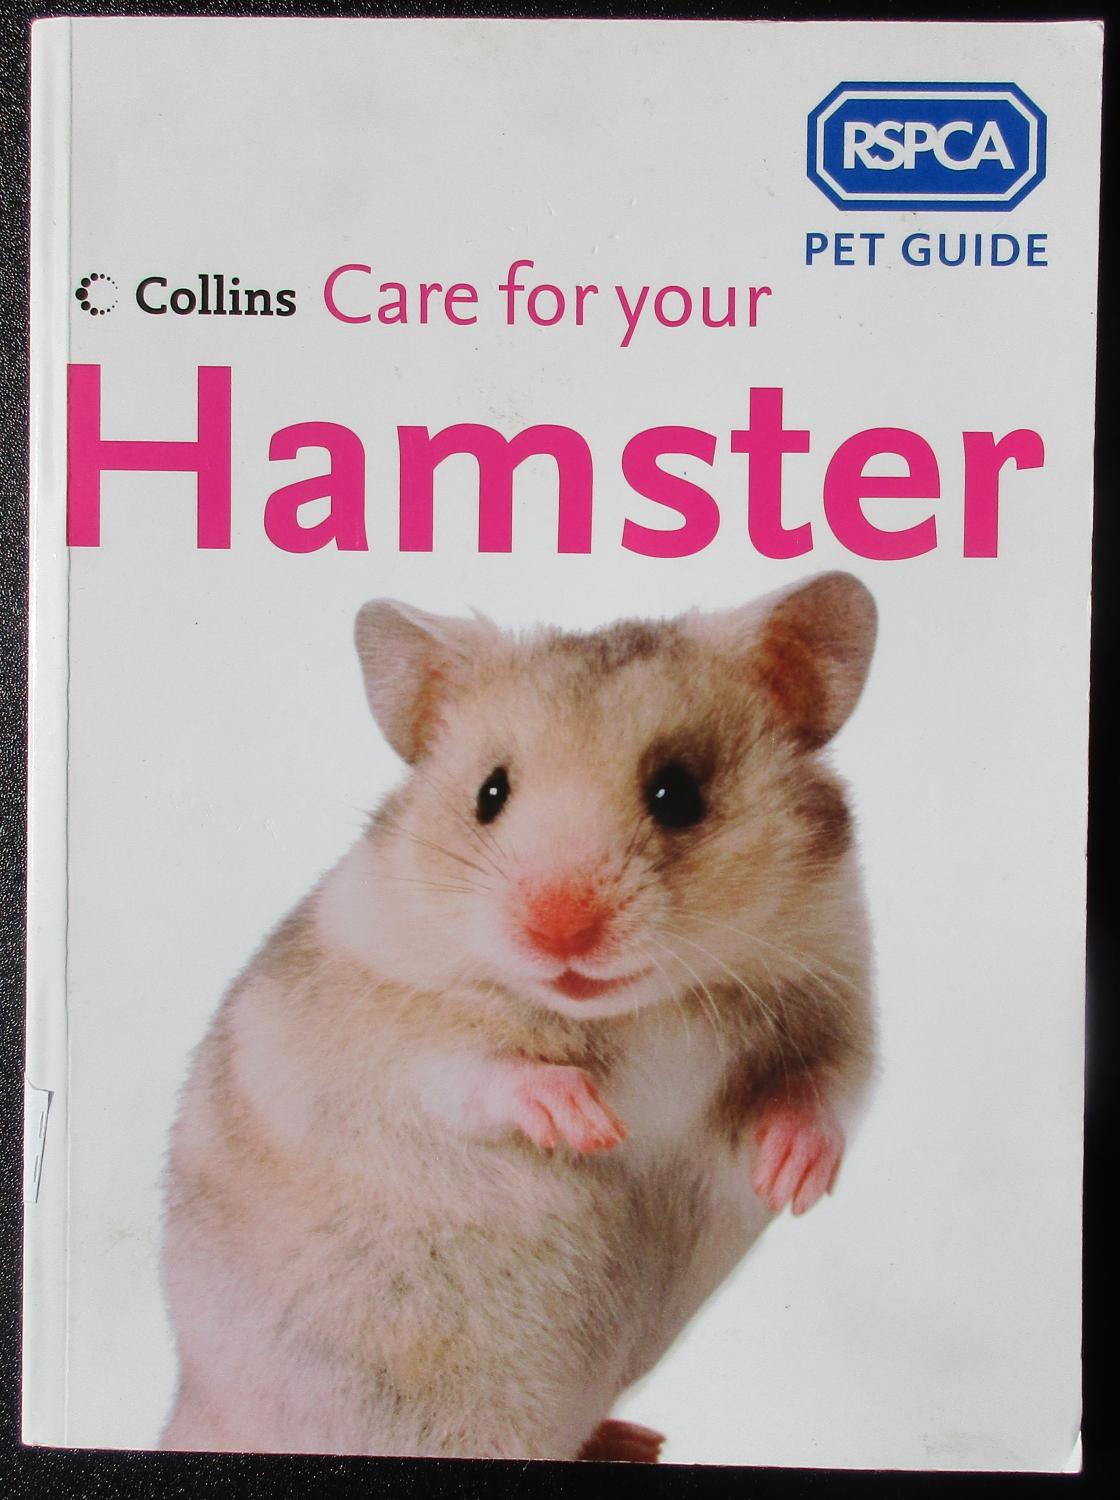 Pets guide. Сага хомяк. The Hamster is the Sofa.